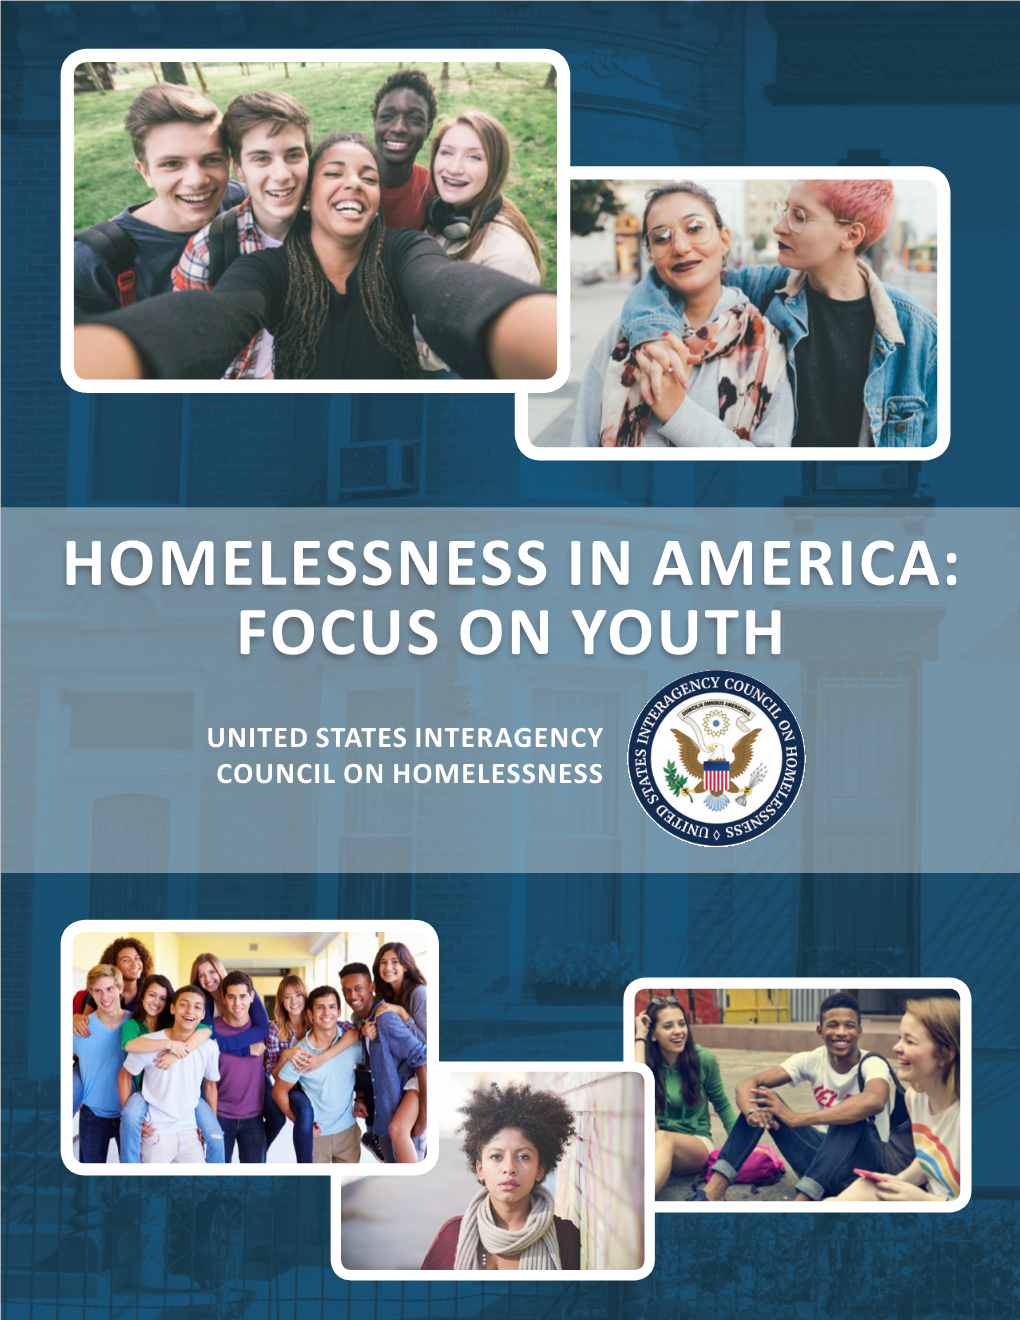 HOMELESSNESS in AMERICA: Focus on Youth